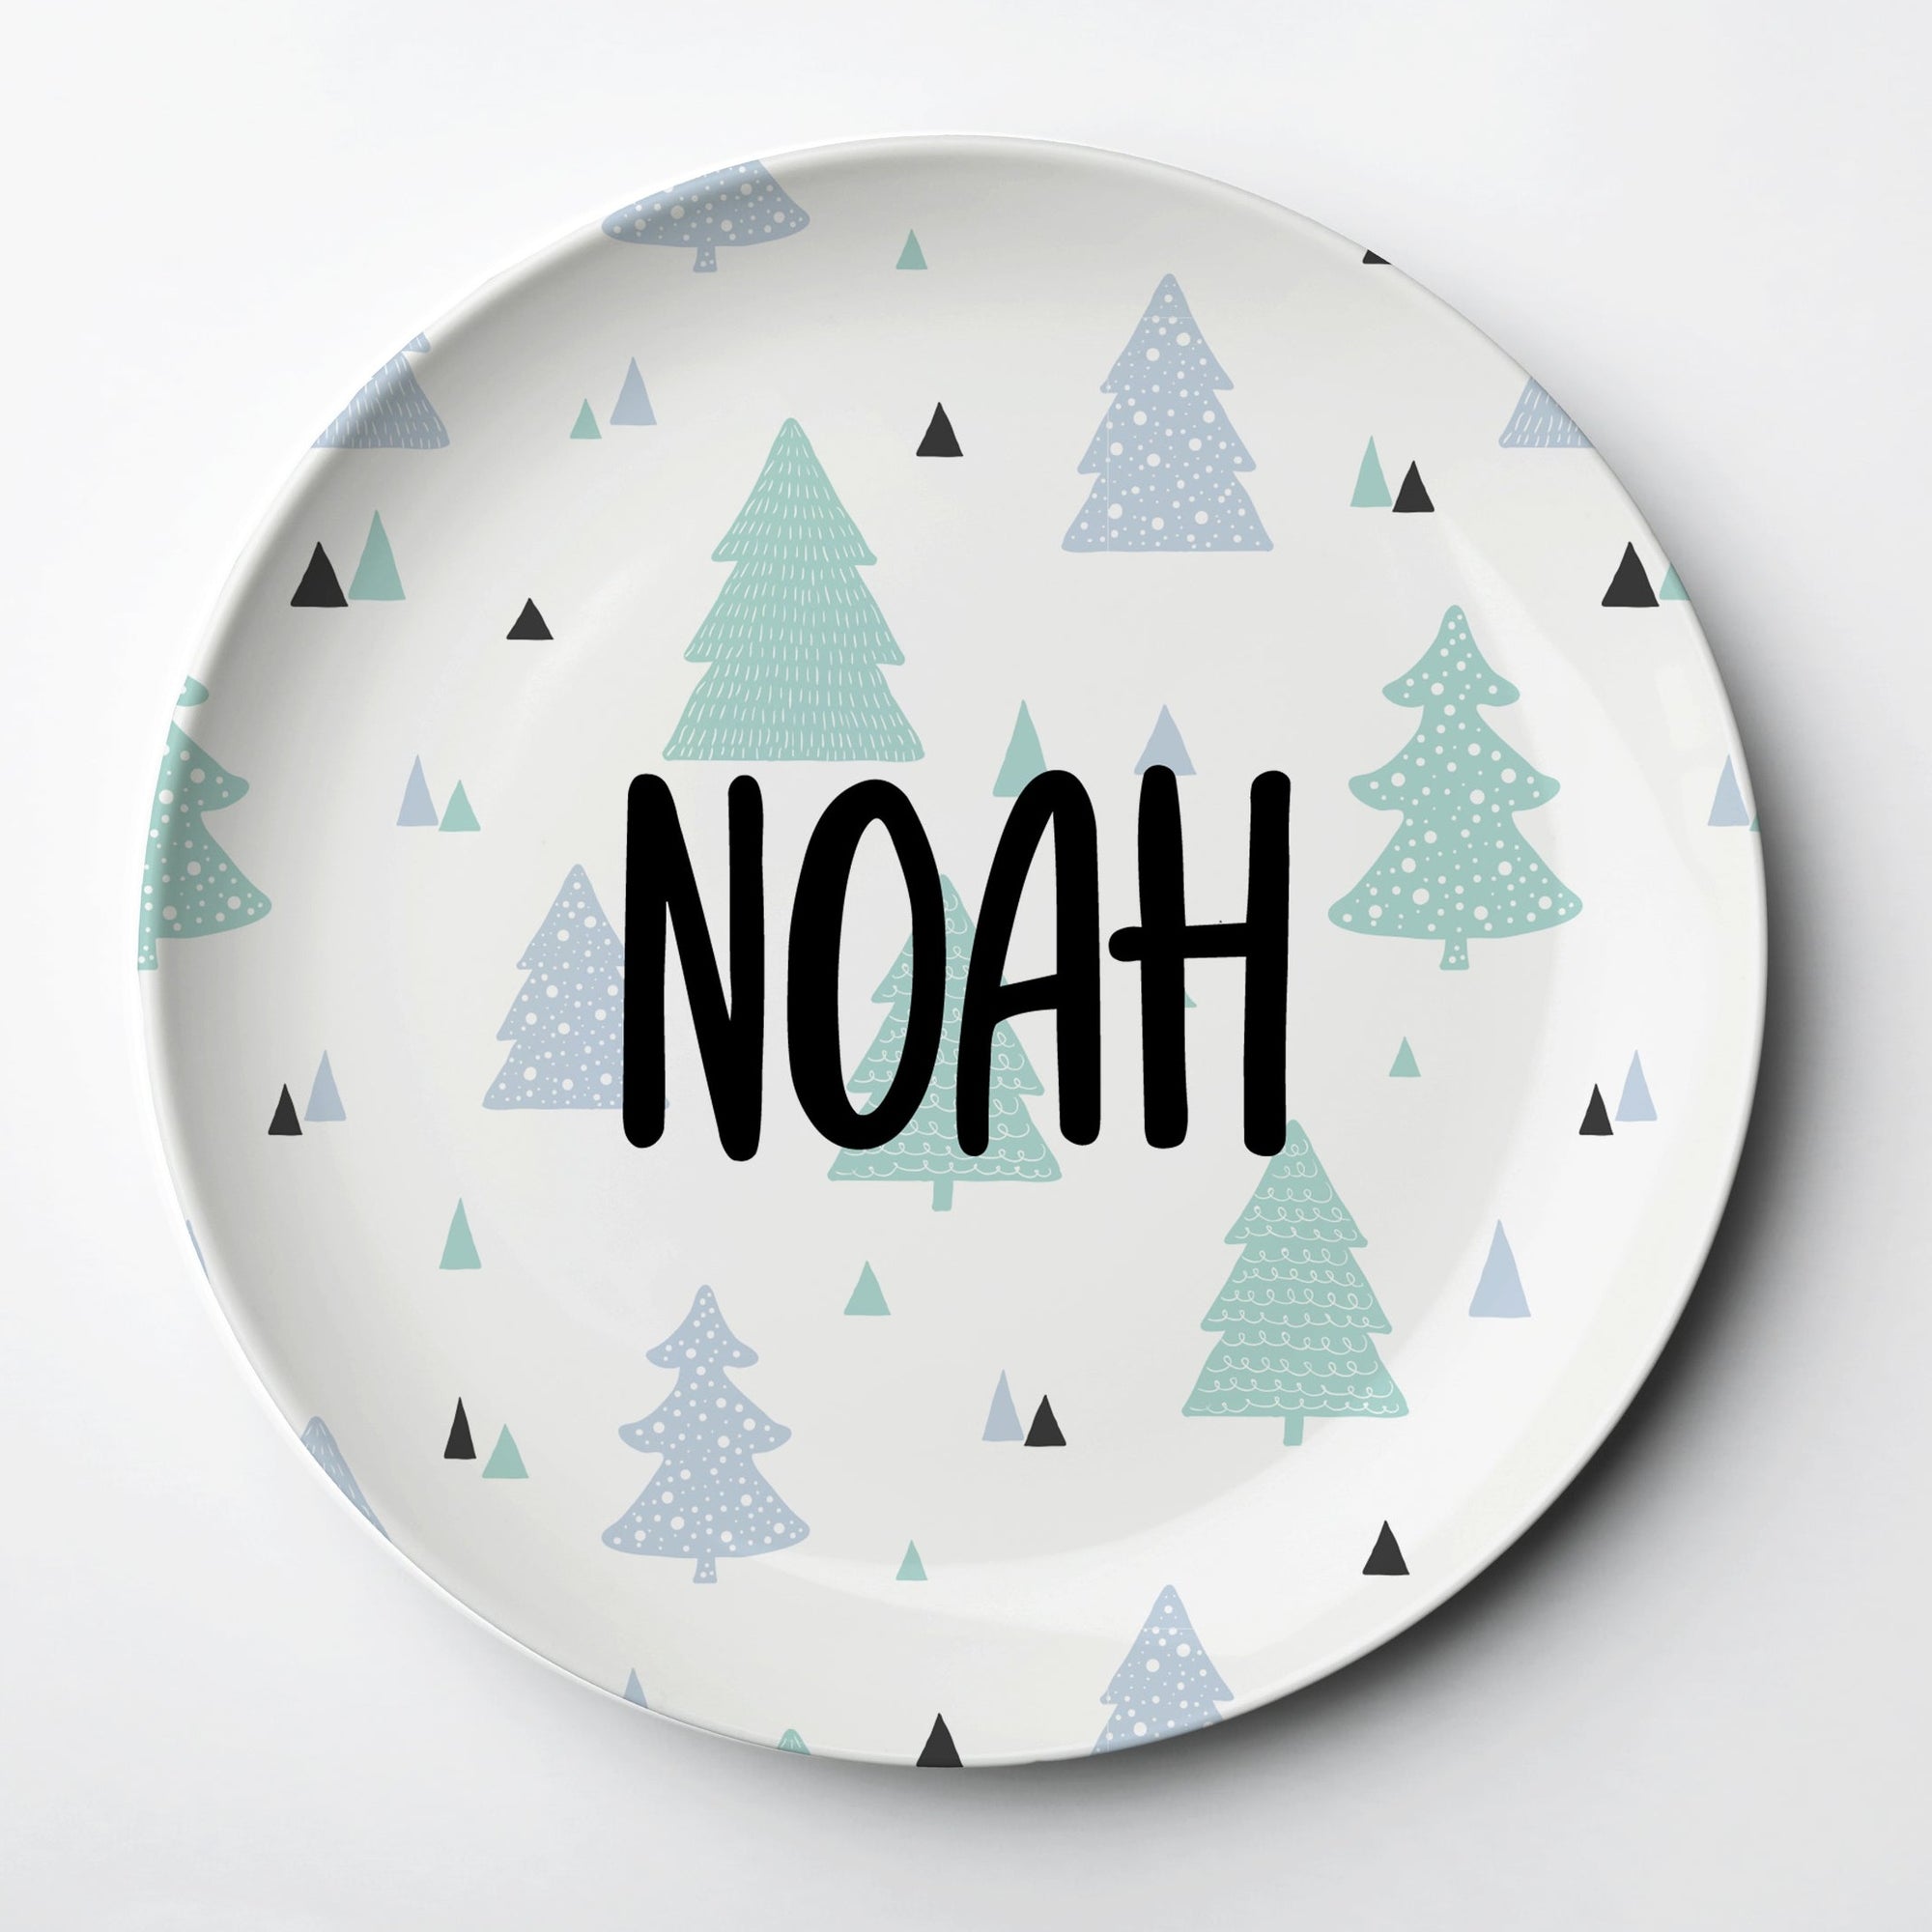 Christmas Personalized Plate, with pastel christmas trees, thick polymer plastic, microwave and dishwasher safe, will last for years, made in the USA